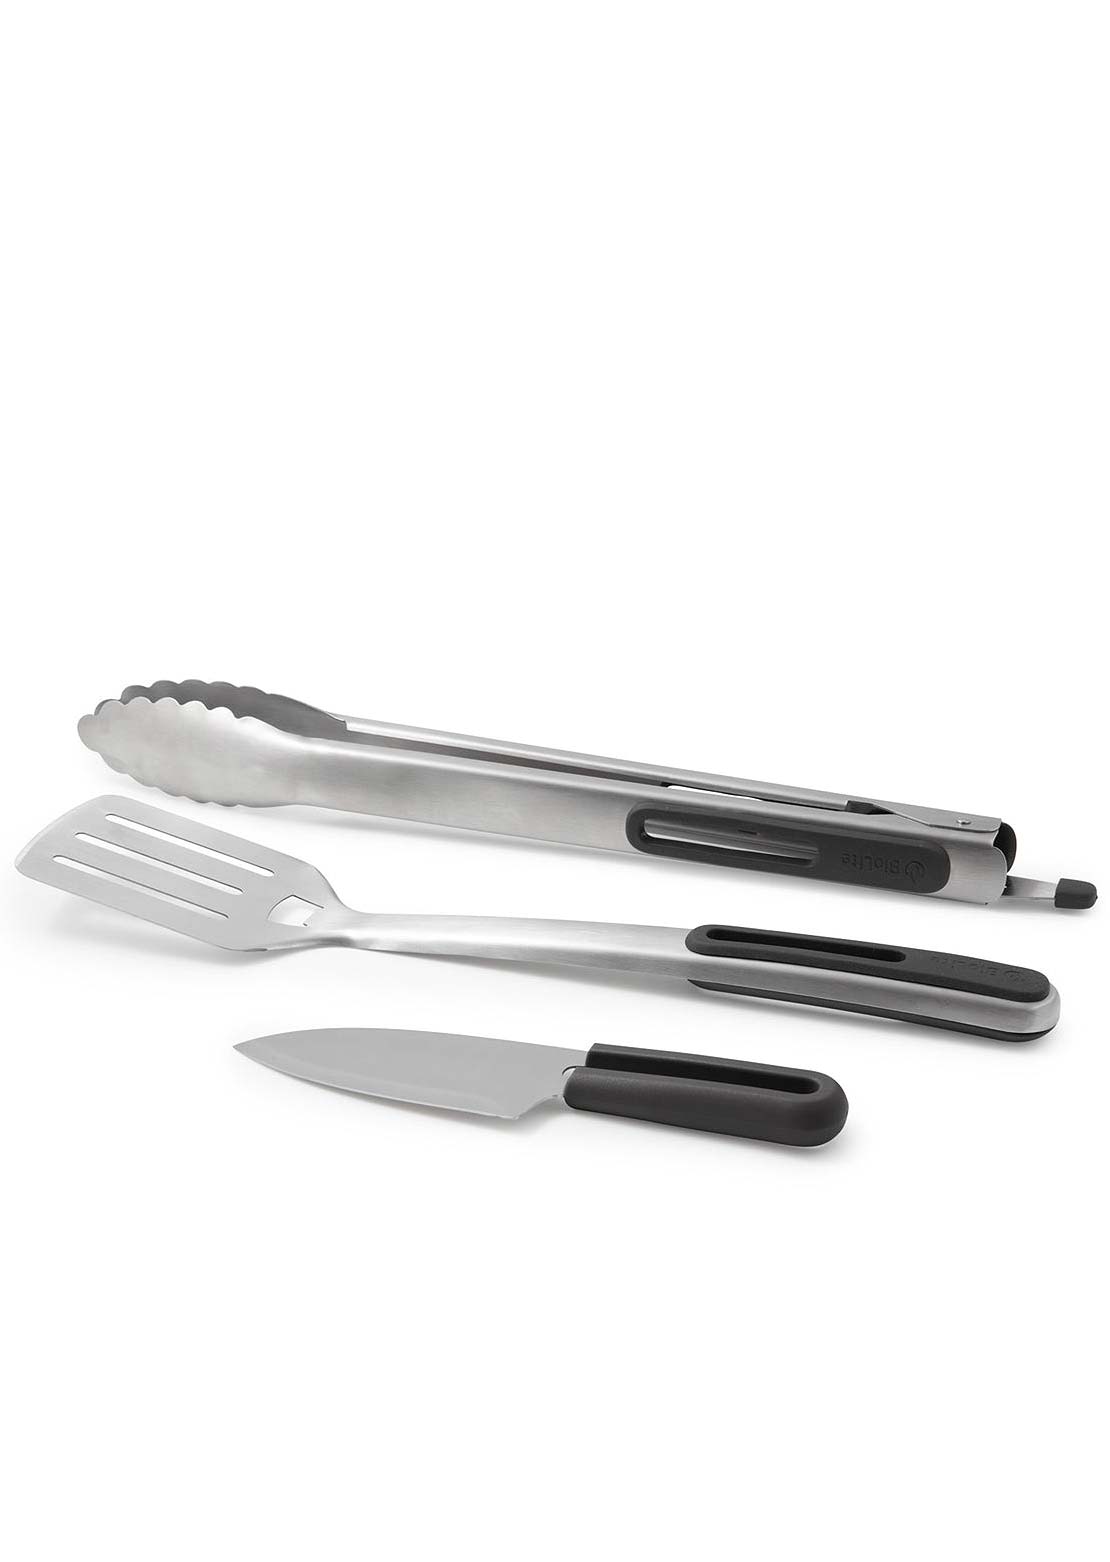 BioLite Prep and Grill Toolkit